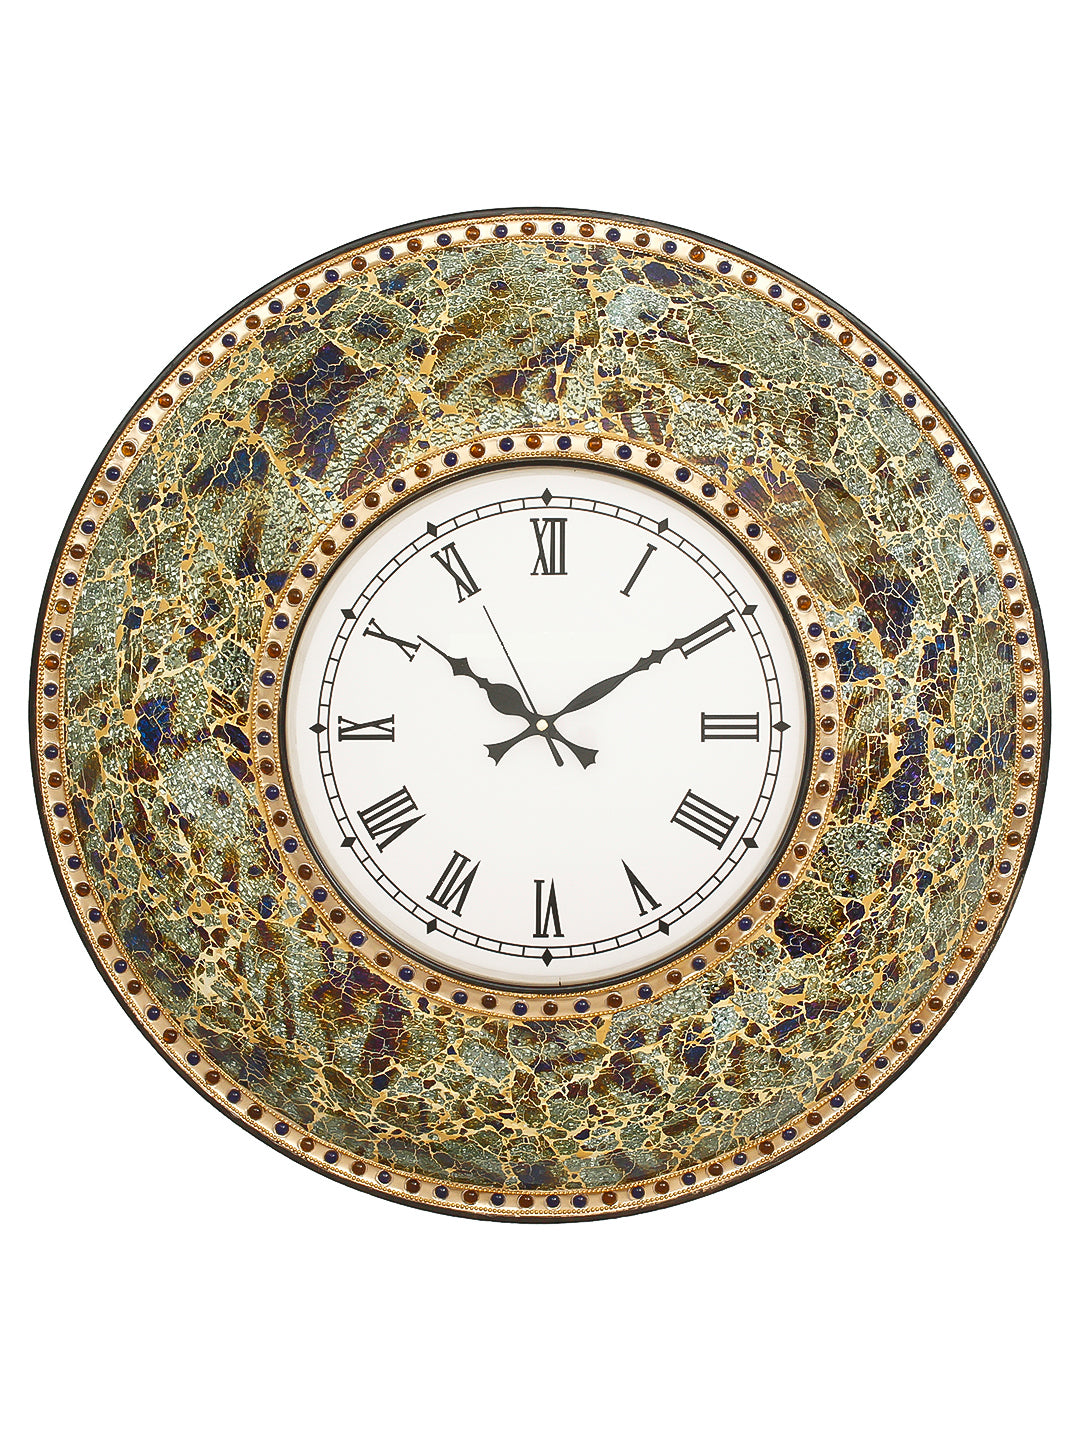 Multicolor Mosaic Glass & Wood Round Handcrafted Analog Ethnic Luxury Roman Numeral Wall Clock